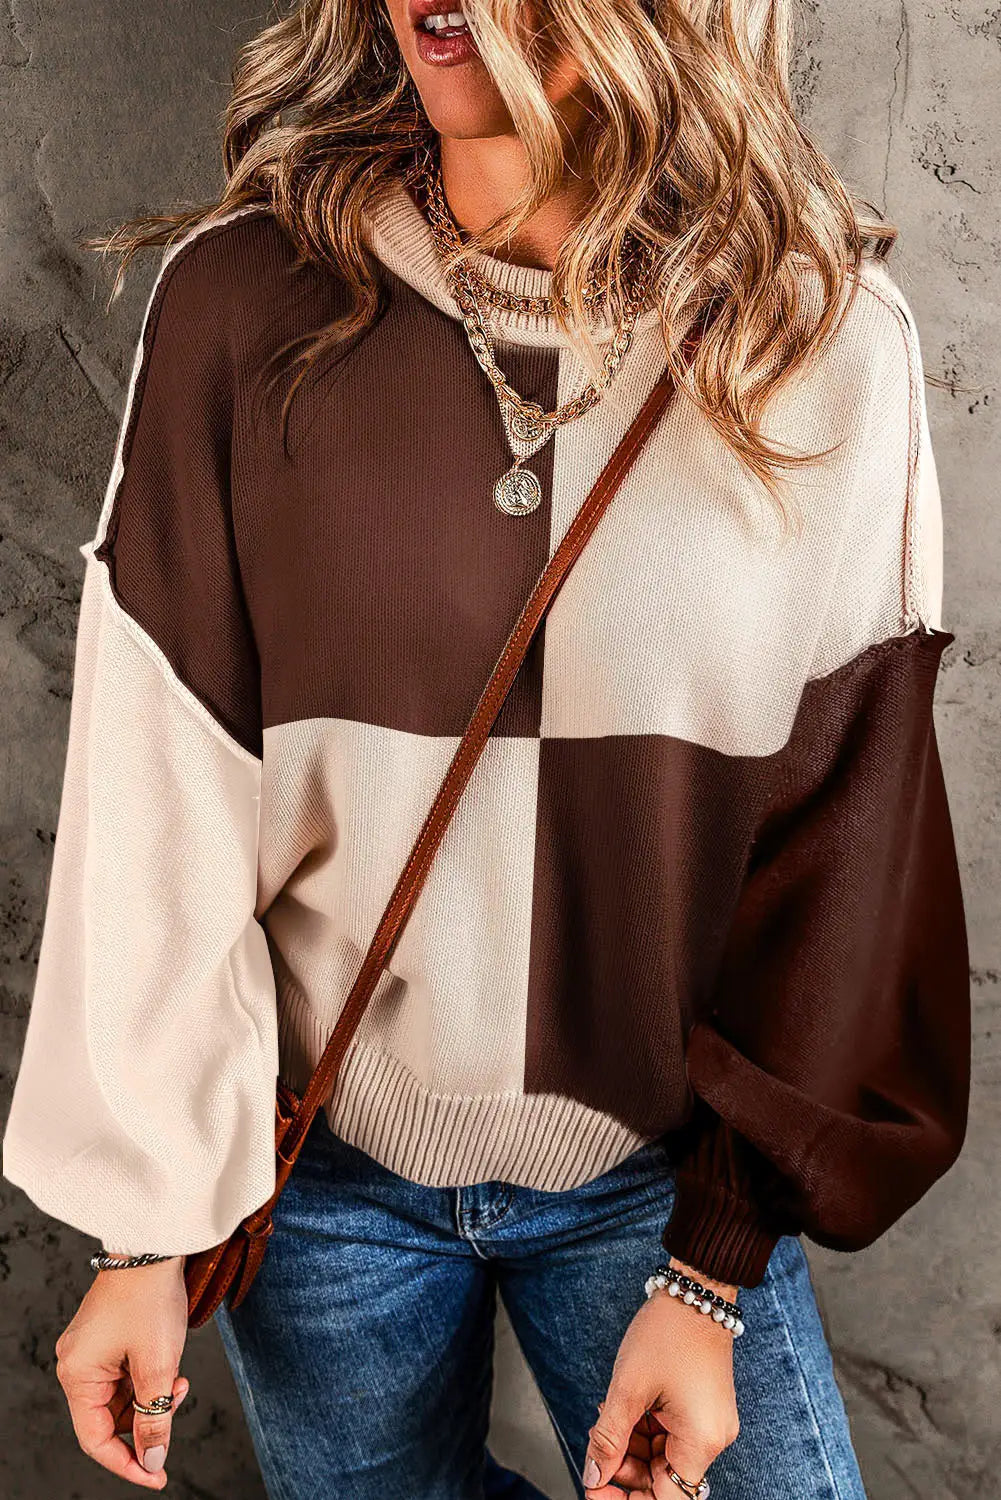 Chicory coffee contrast color exposed seam drop shoulder sweater - s / 55% acrylic + 45% cotton - tops